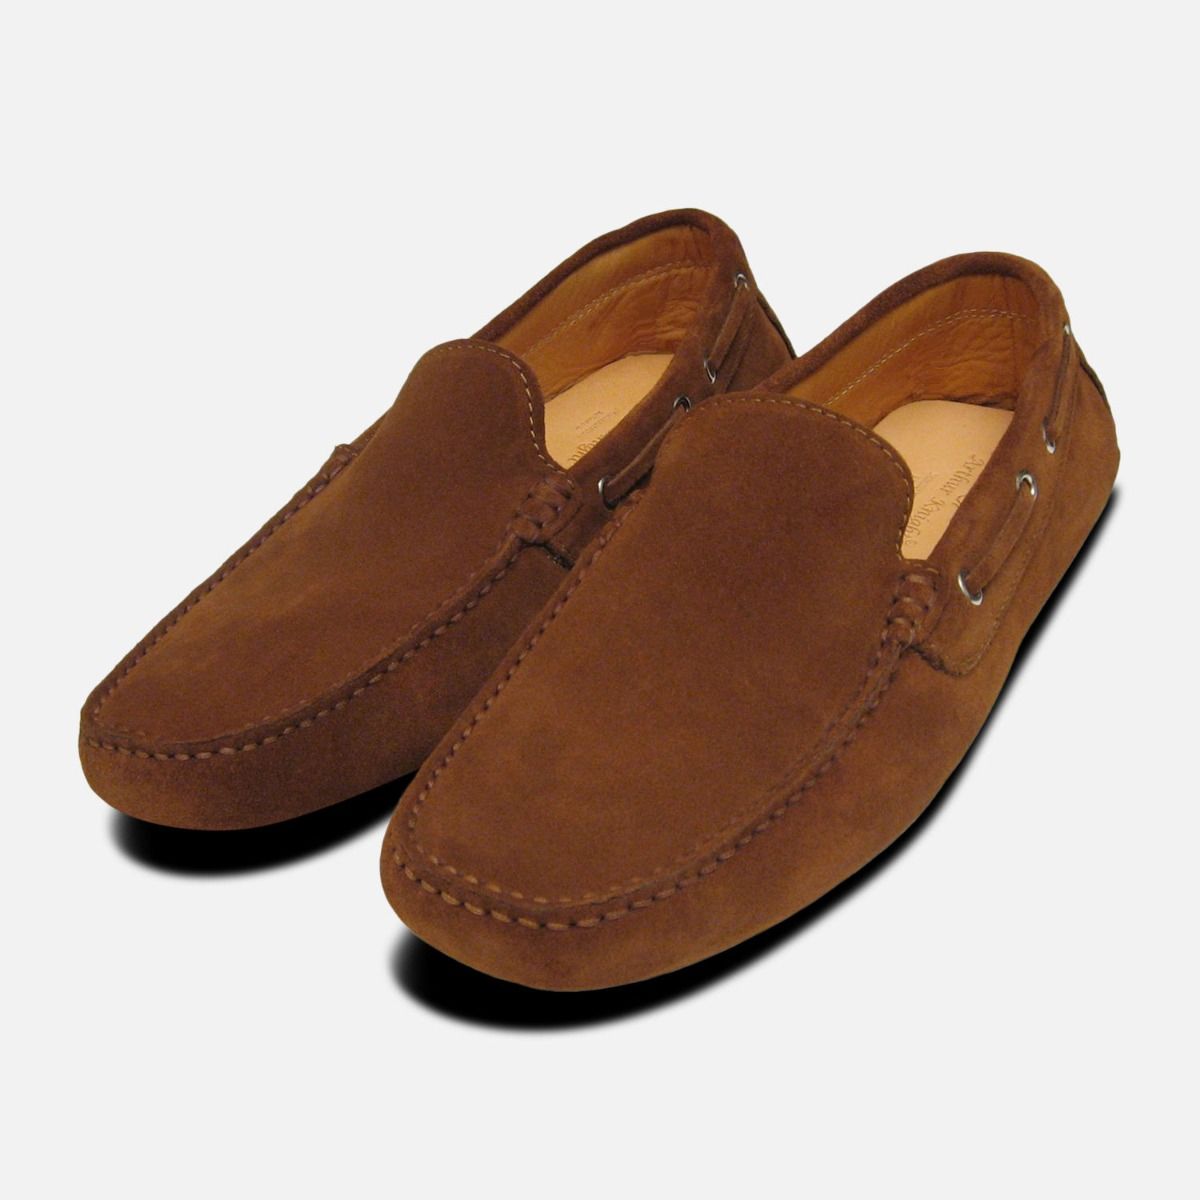 Mens Driving Shoes Tobacco Suede Moccasins